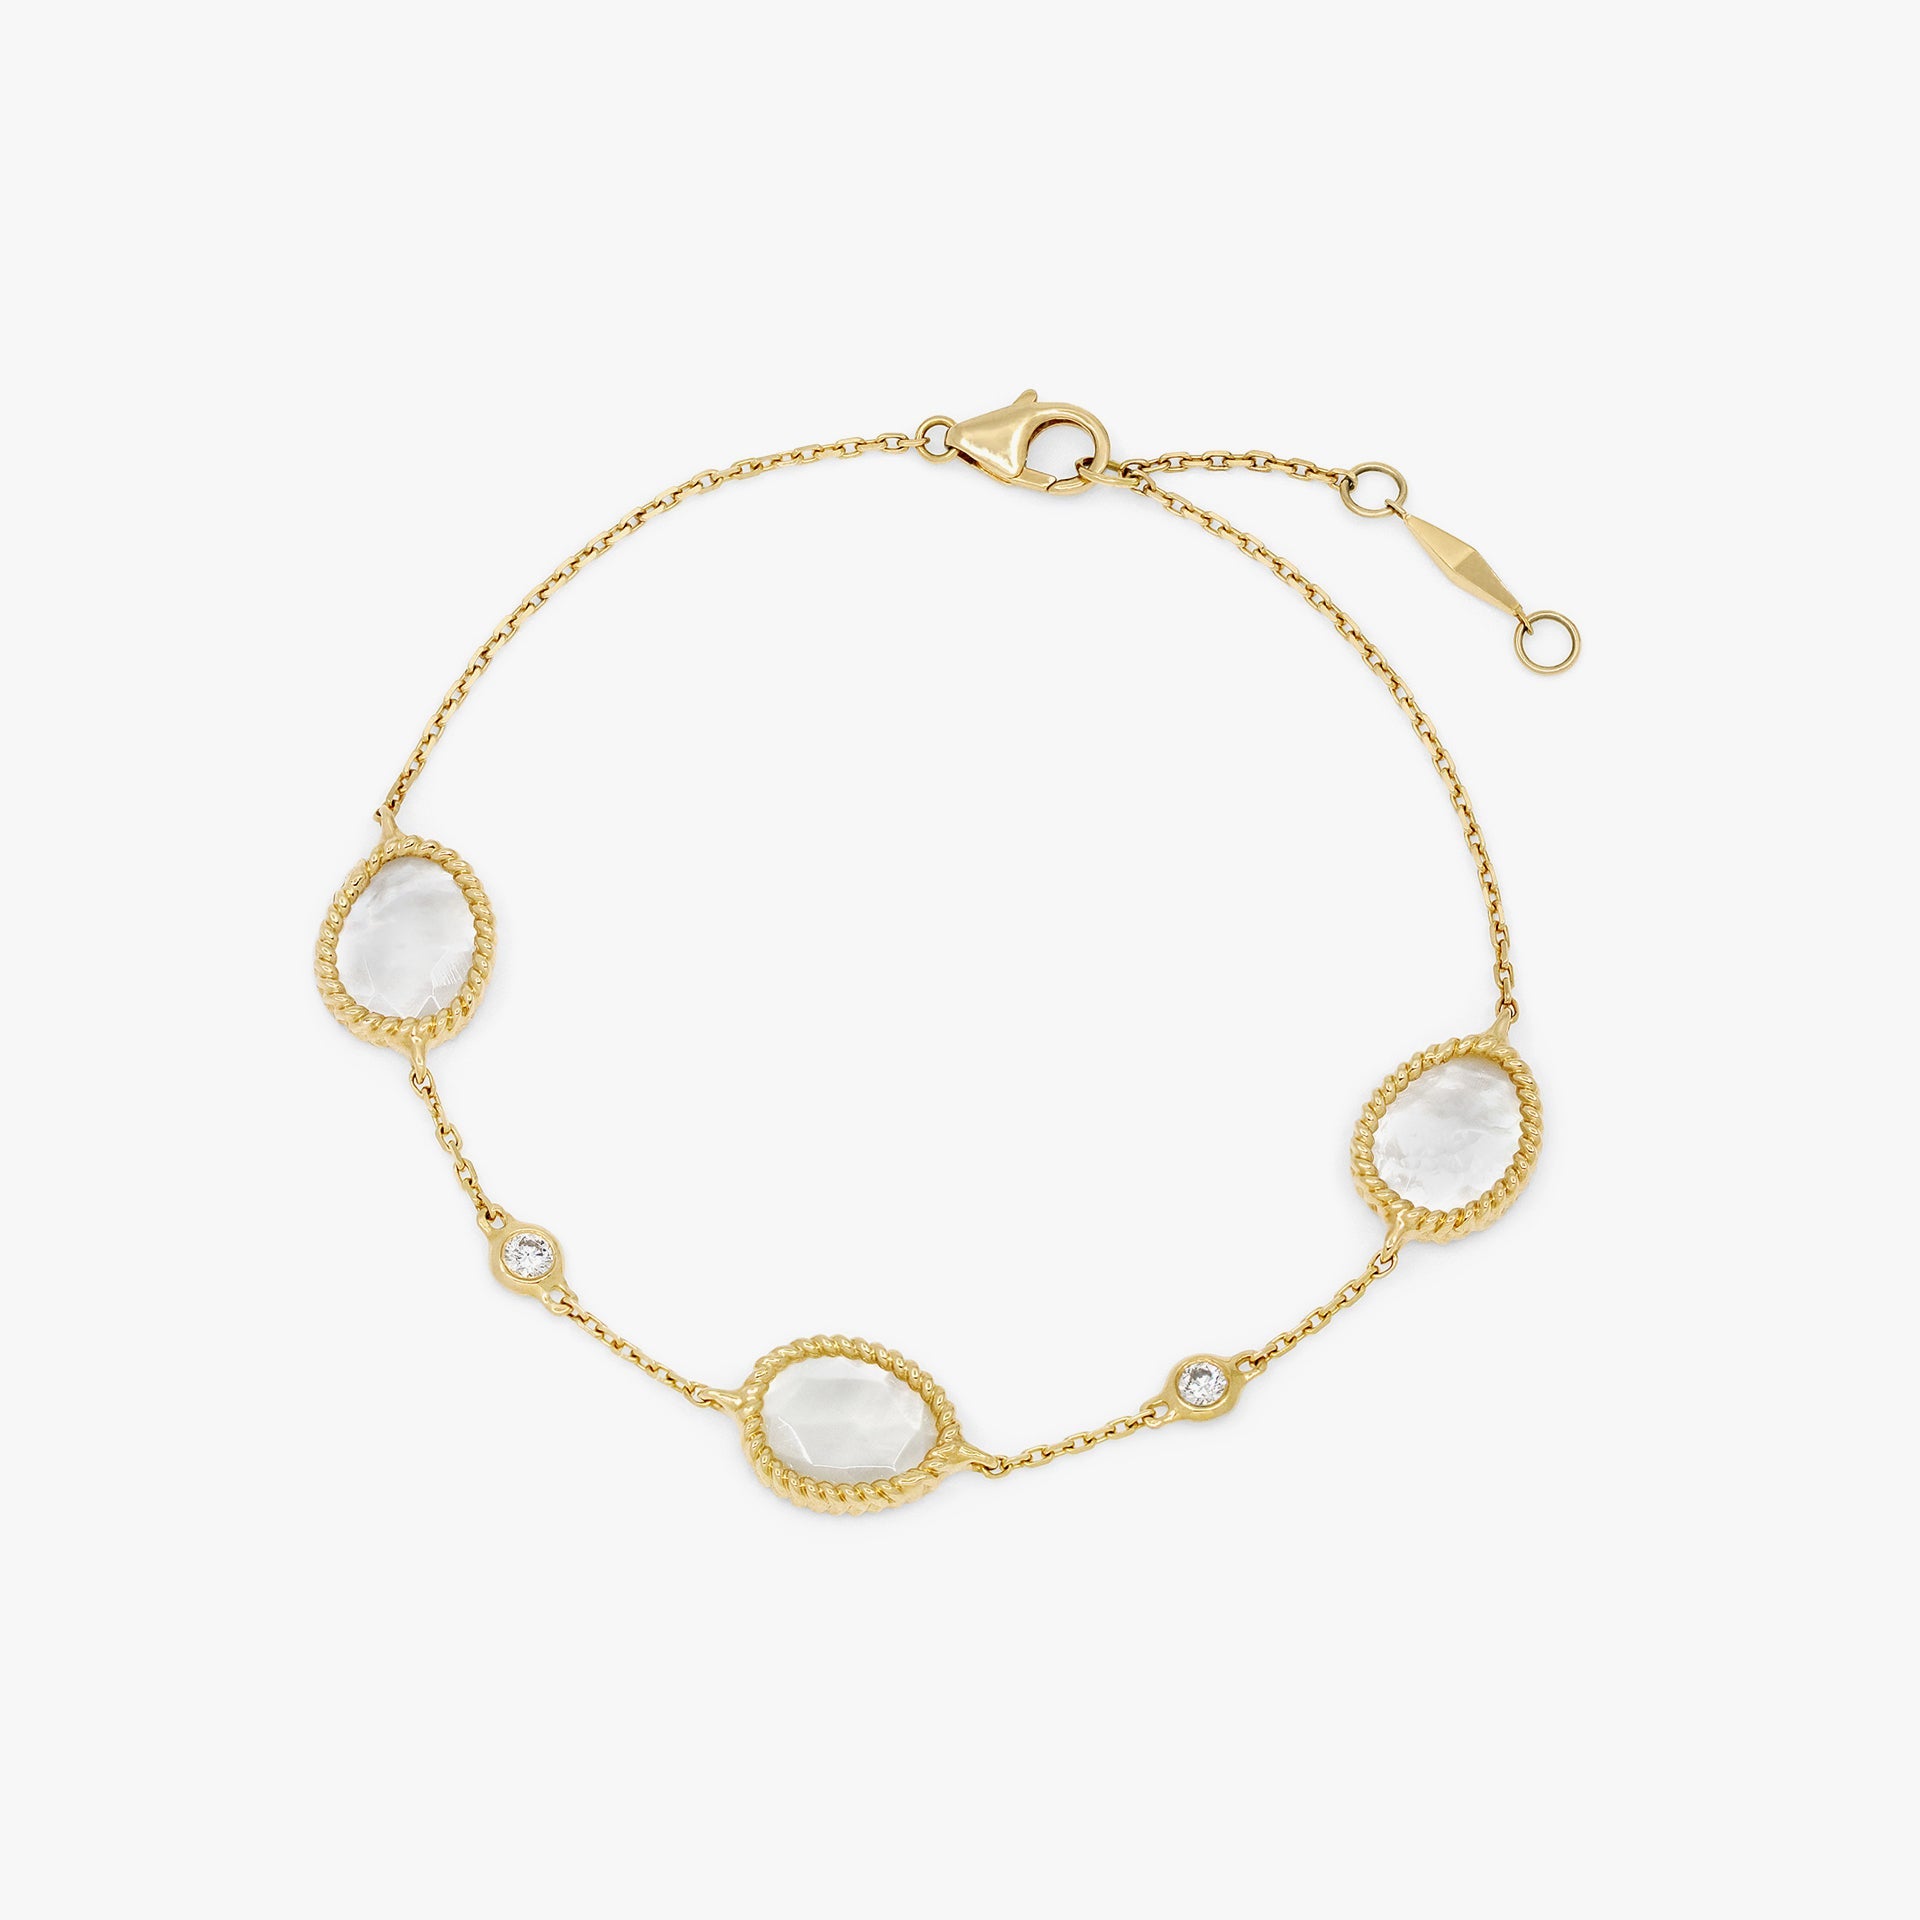 Nina Mariner Three Stone Bracelet In 18 Karat Yellow Gold With Natural White Diamonds And Mother Of Pearl Stones